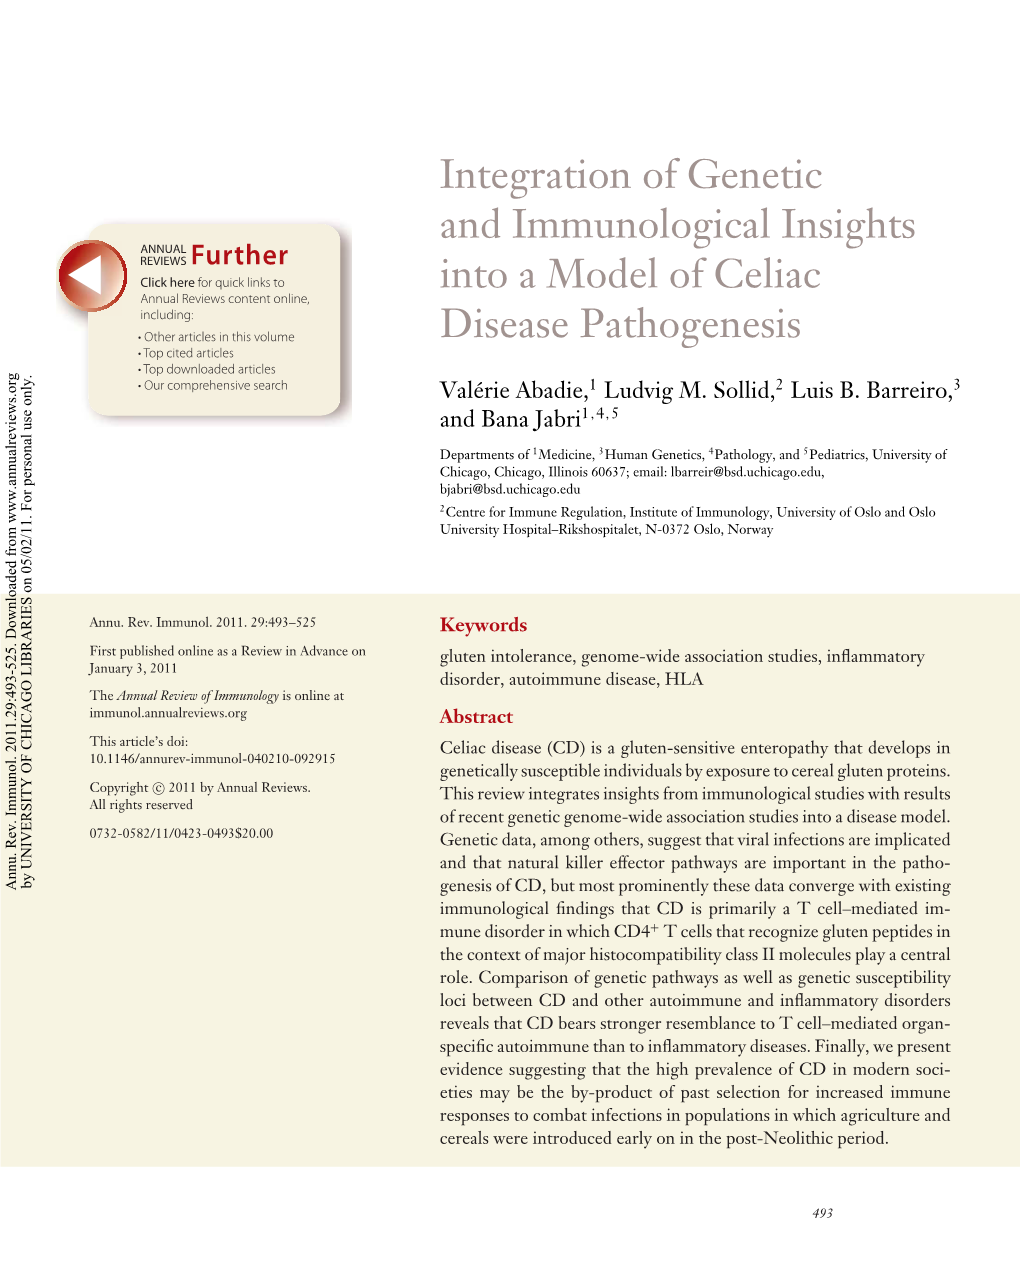 Integration of Genetic and Immunological Insights Into a Model of Celiac Disease Pathogenesis